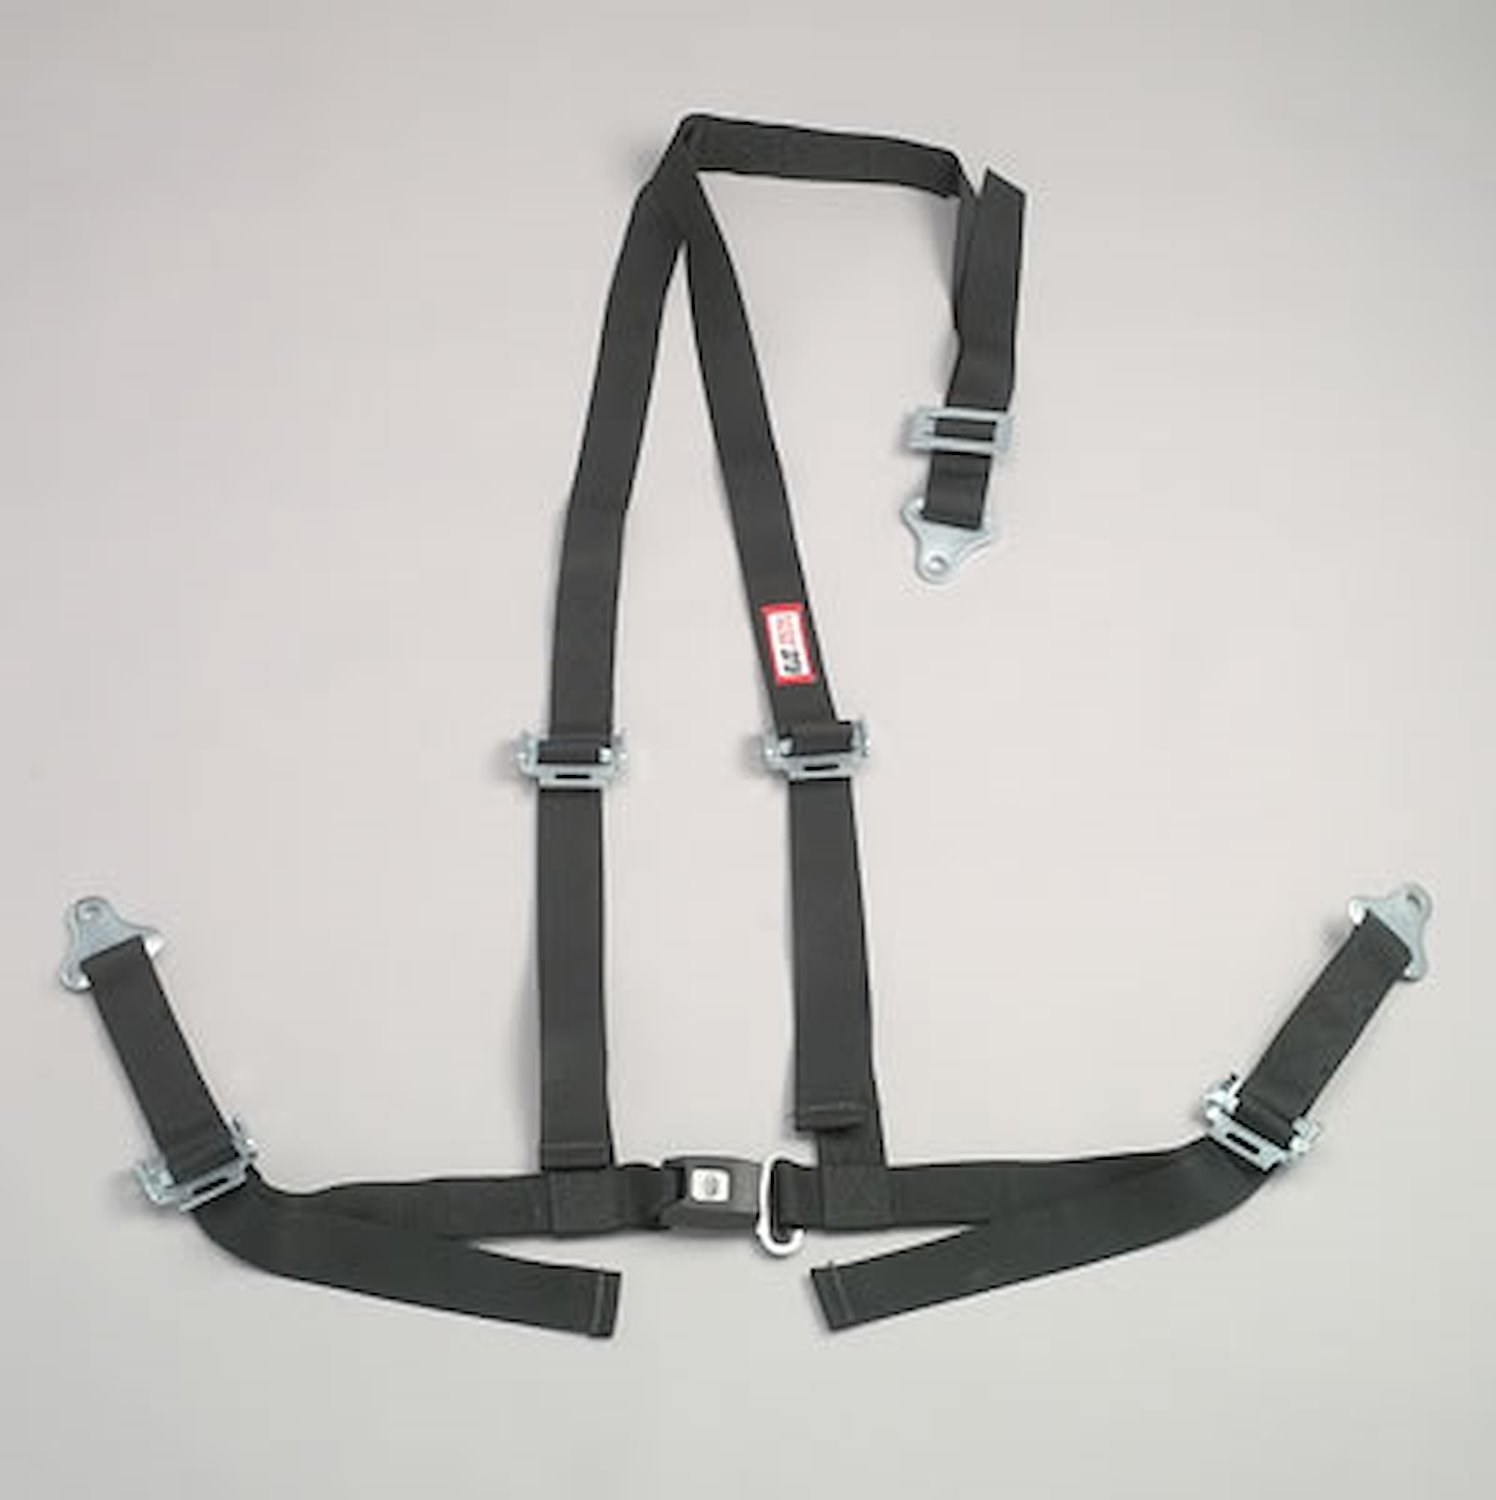 NON-SFI B&T HARNESS 2 PULL UP Lap Belt SNAP 2 S. H. Y FLOOR Mount WRAP/SNAP w/STERNUM STRAP RED